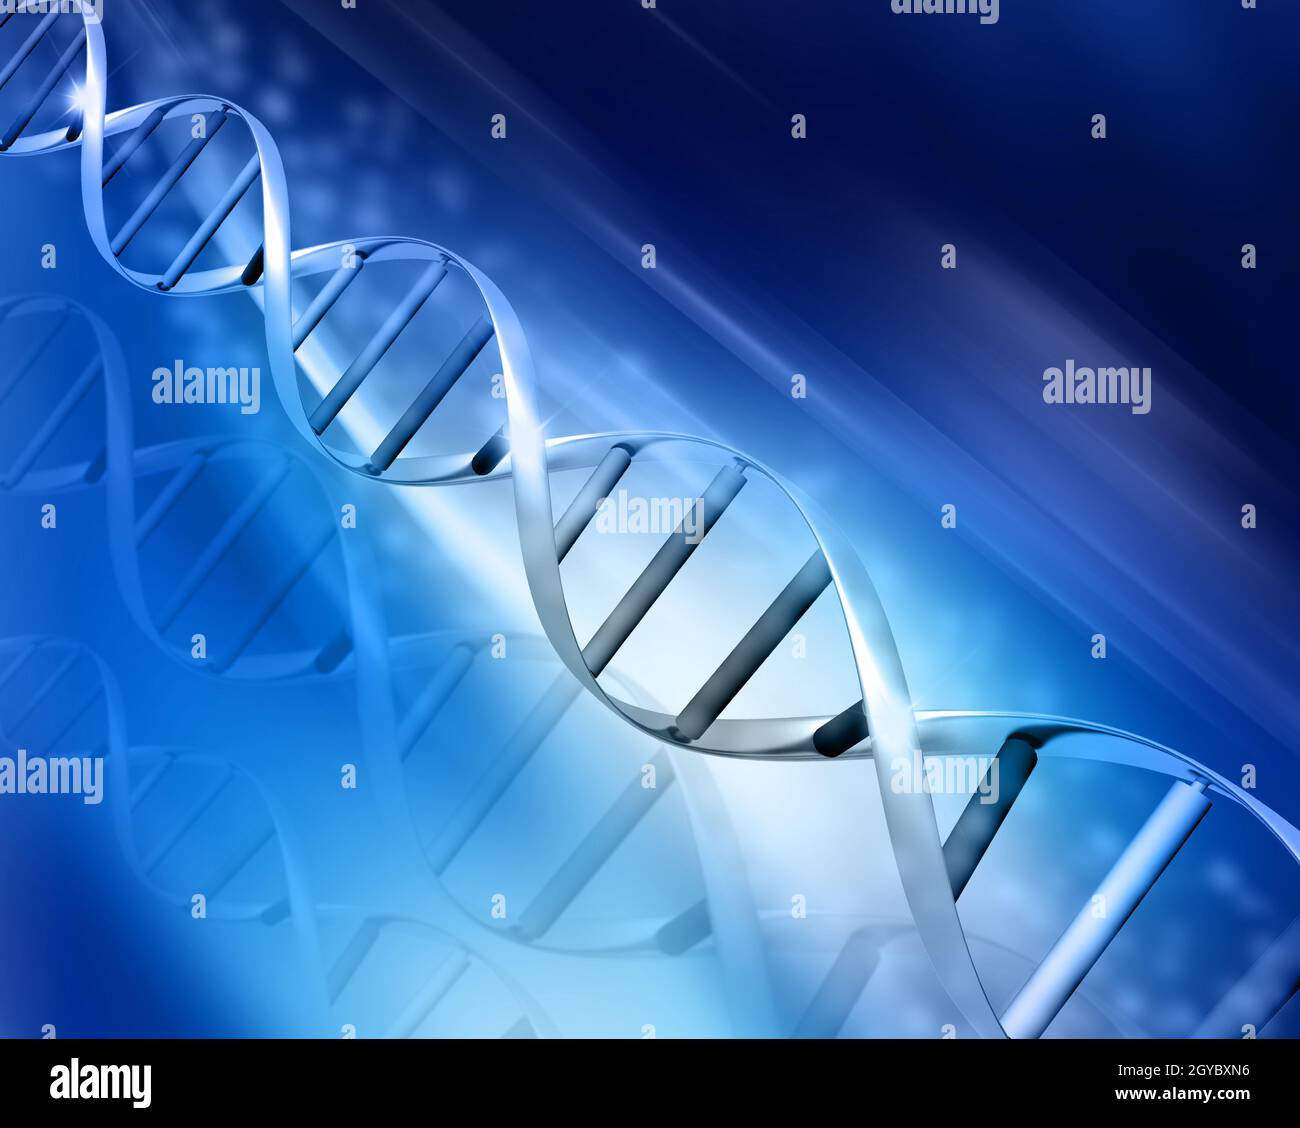 Abstract background with DNA strands in shades of blue Stock Photo